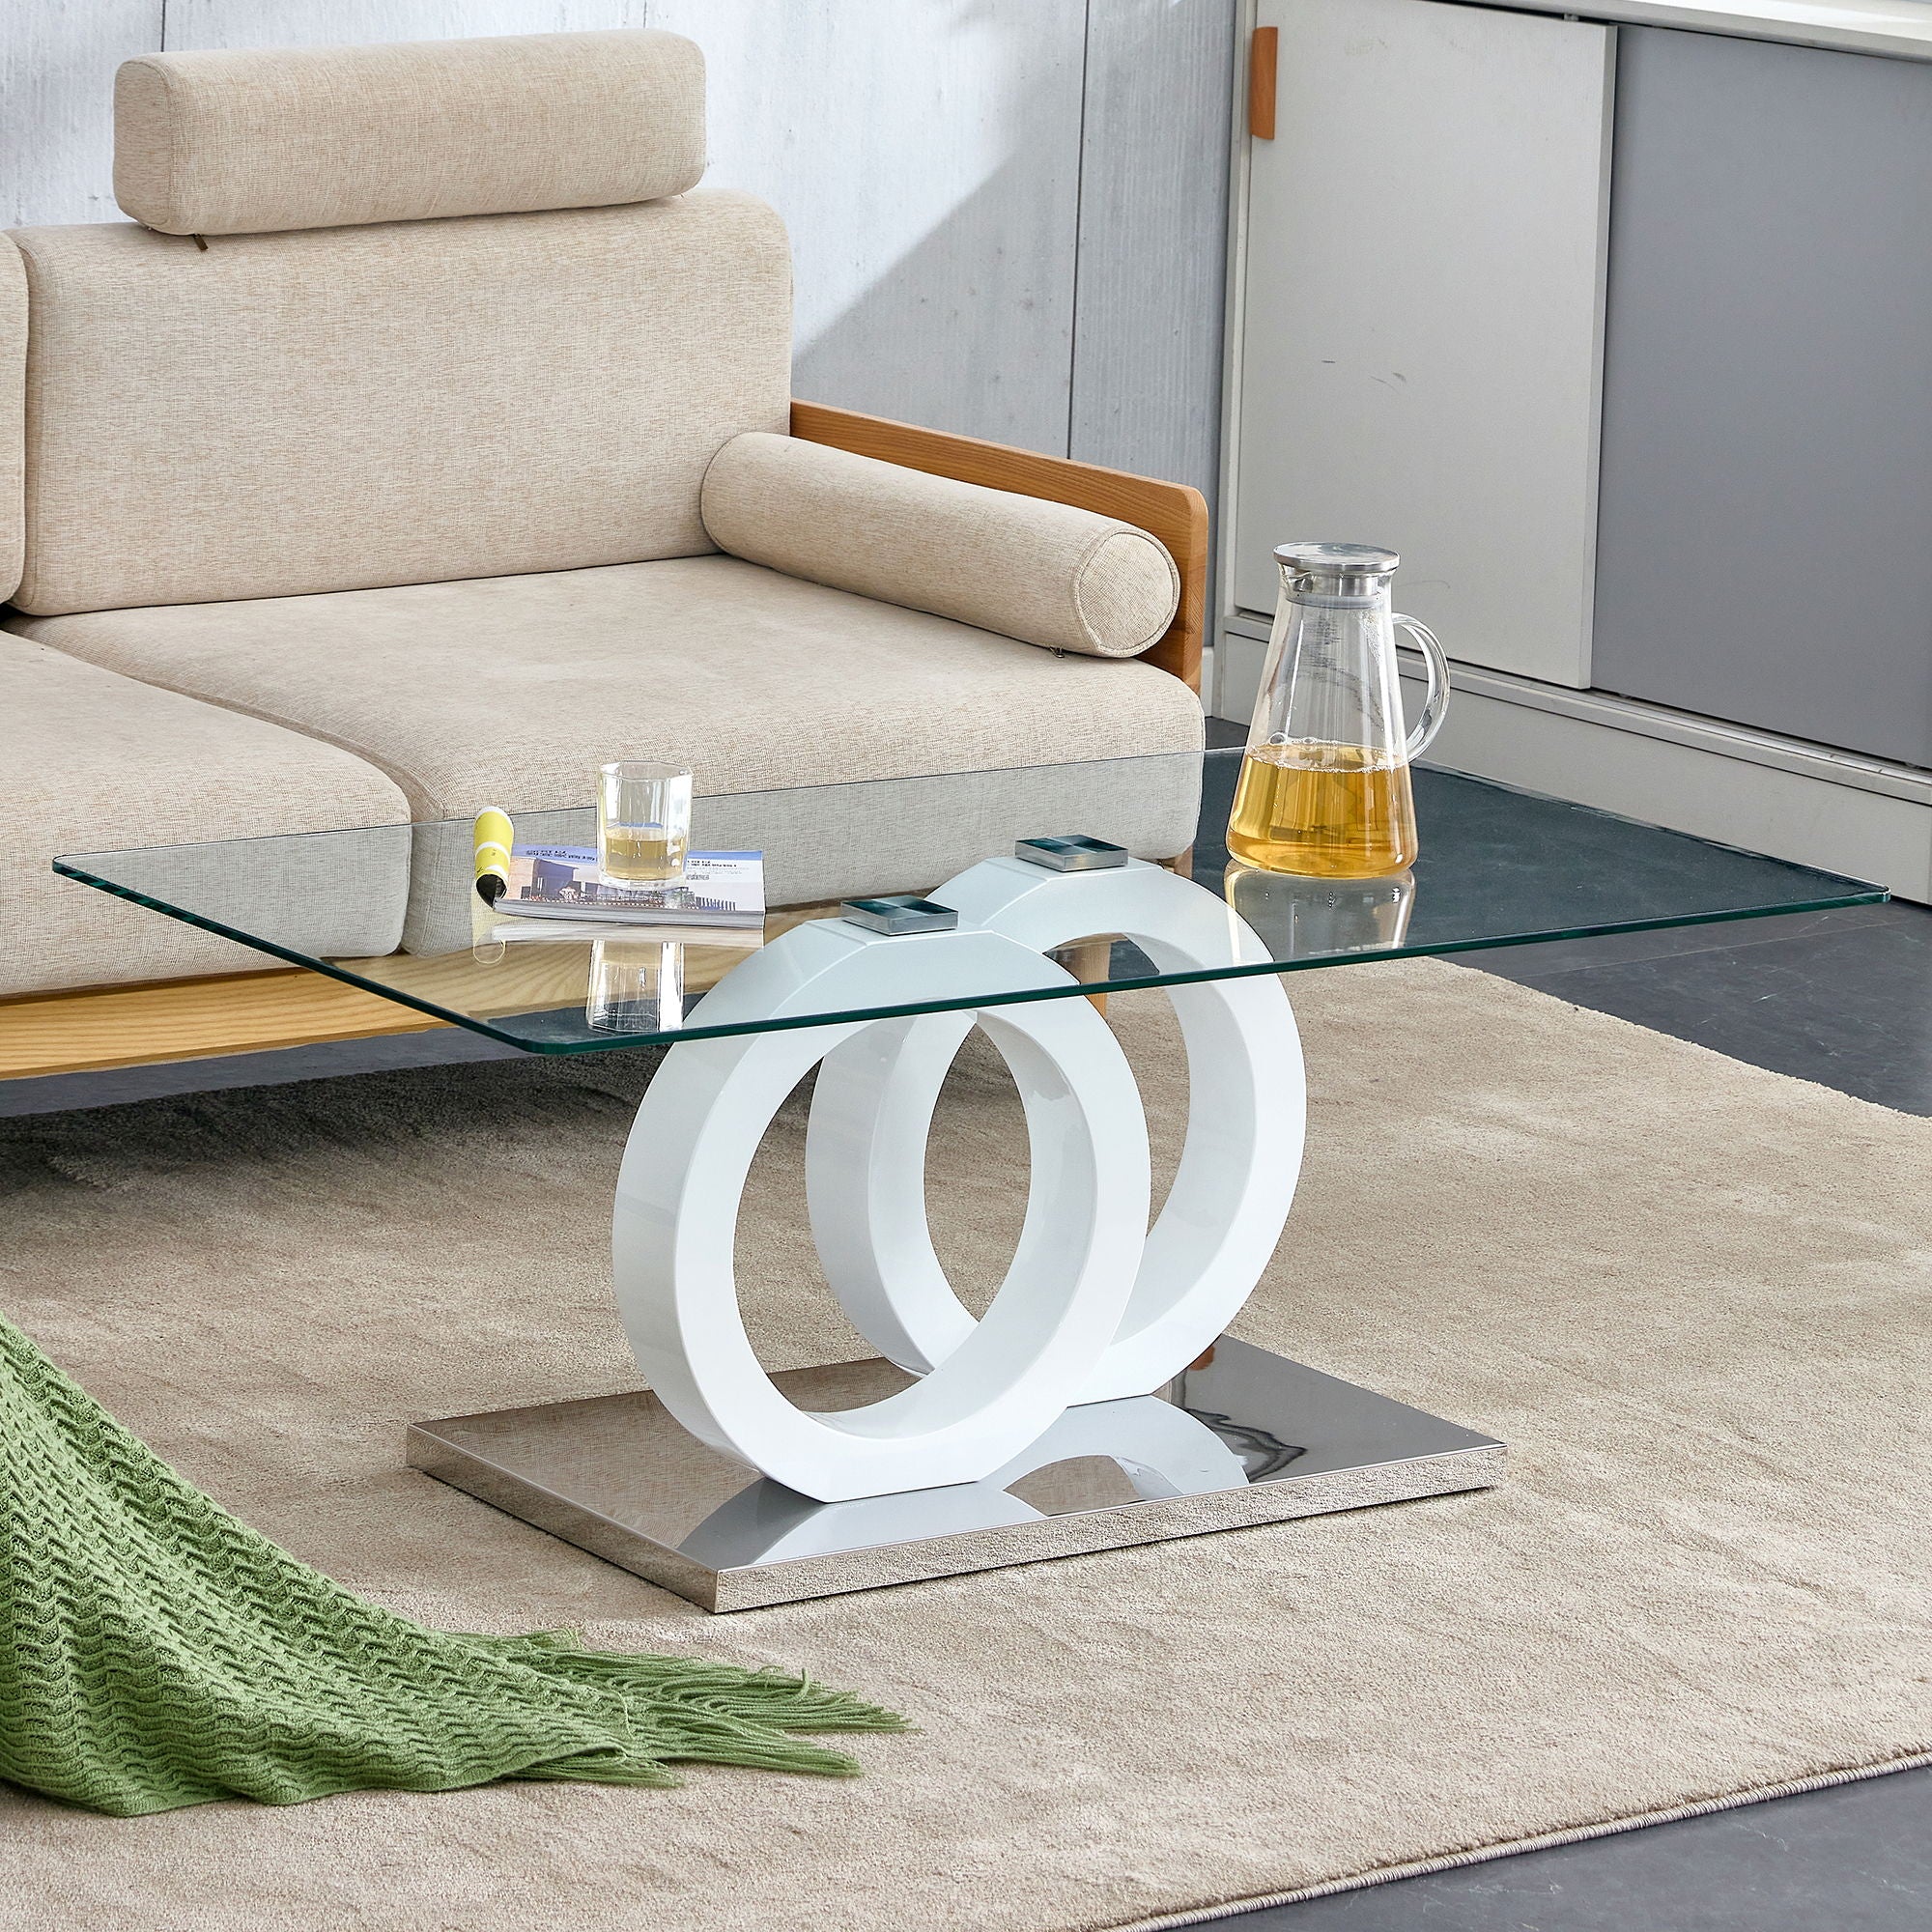 Rectangular Modern And Fashionable Coffee Table With Tempered Glass Tabletop And White Legs Suitable For Living Room